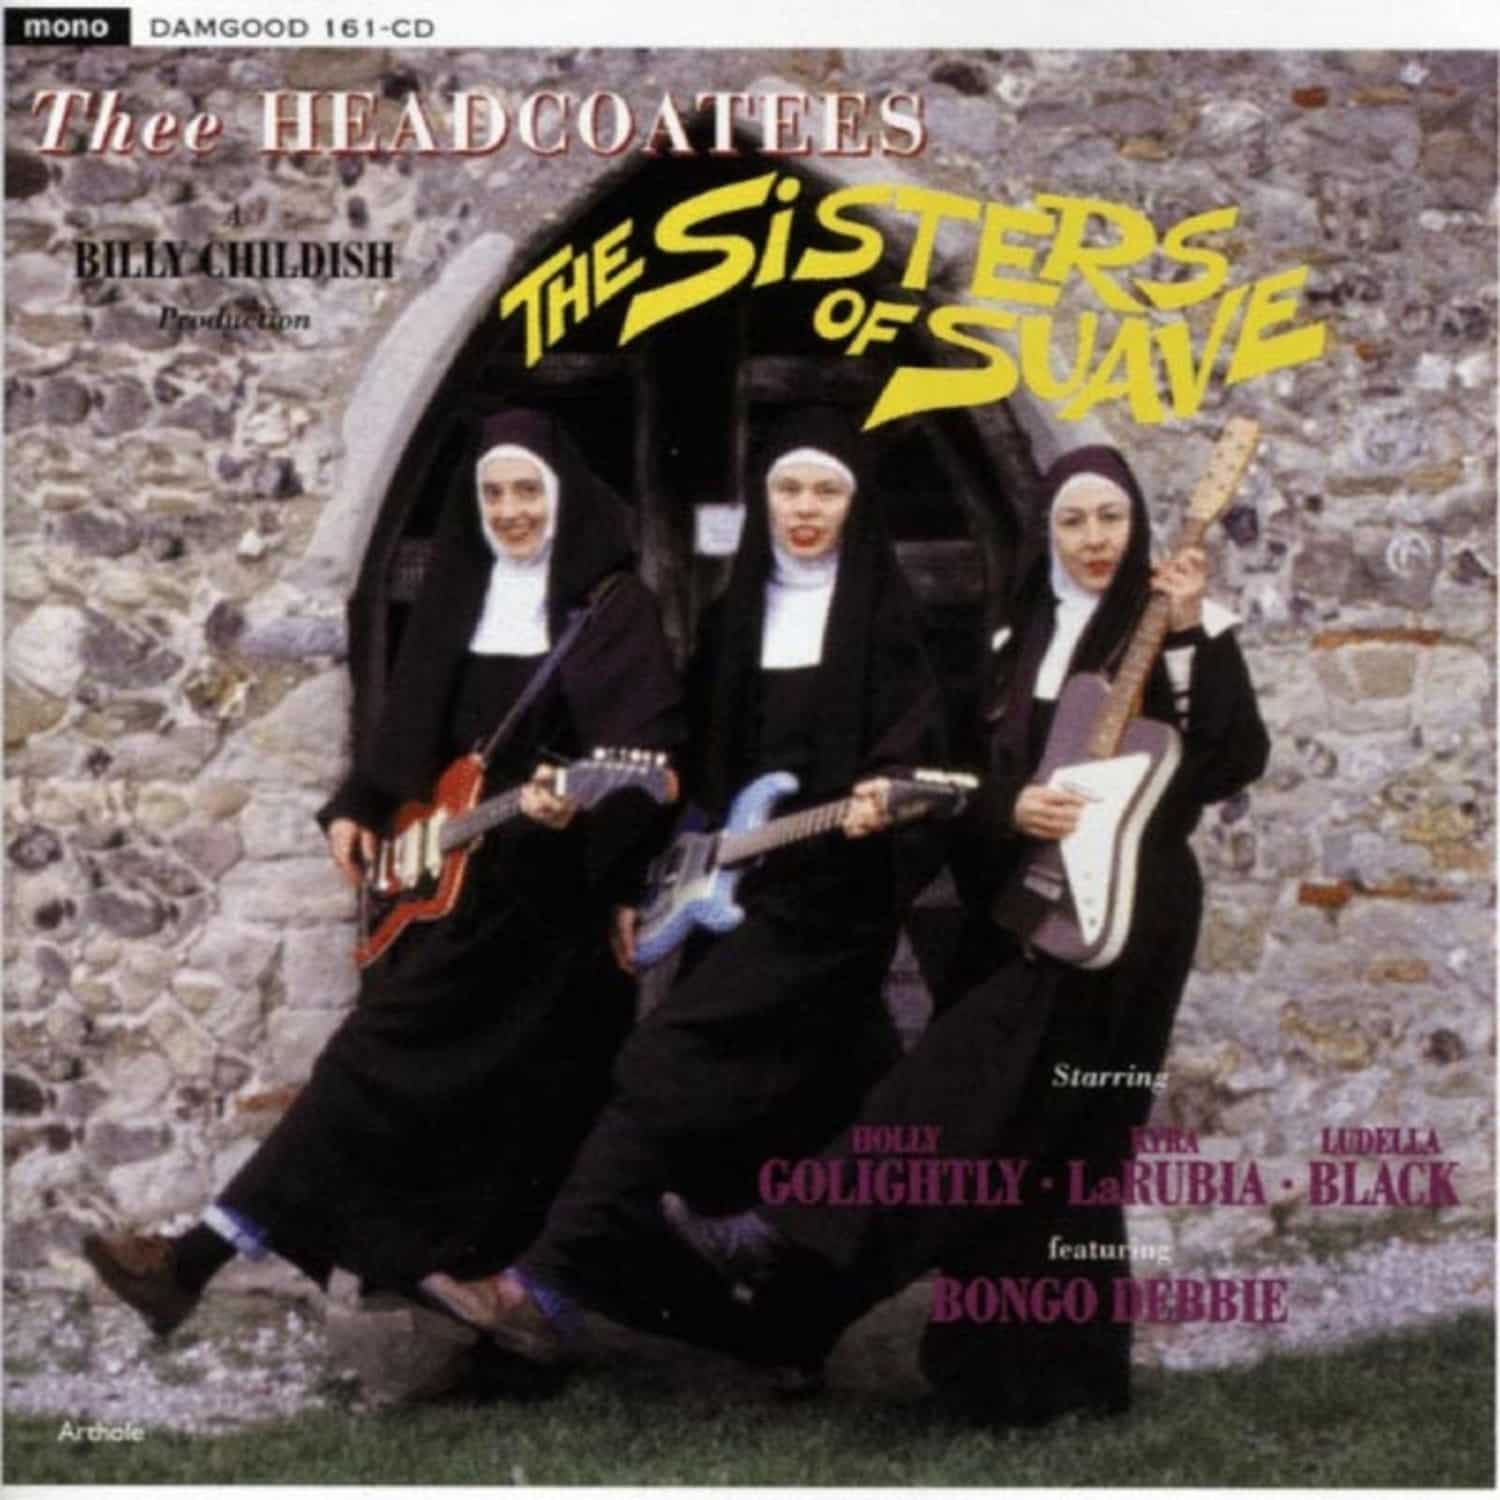 Thee Headcoatees - SISTERS OF SUAVE 